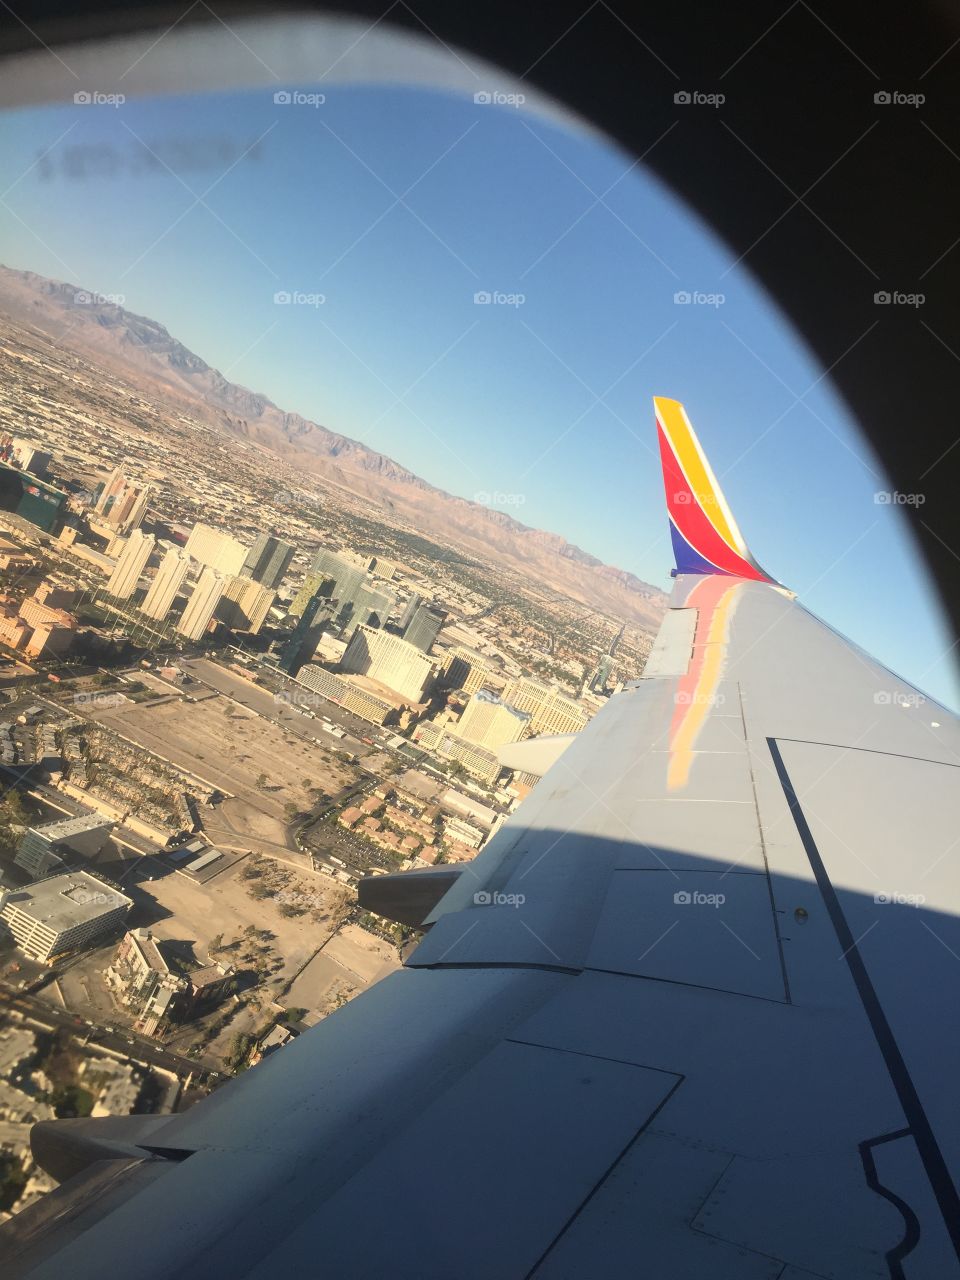 Farewell view of sin city from the sky